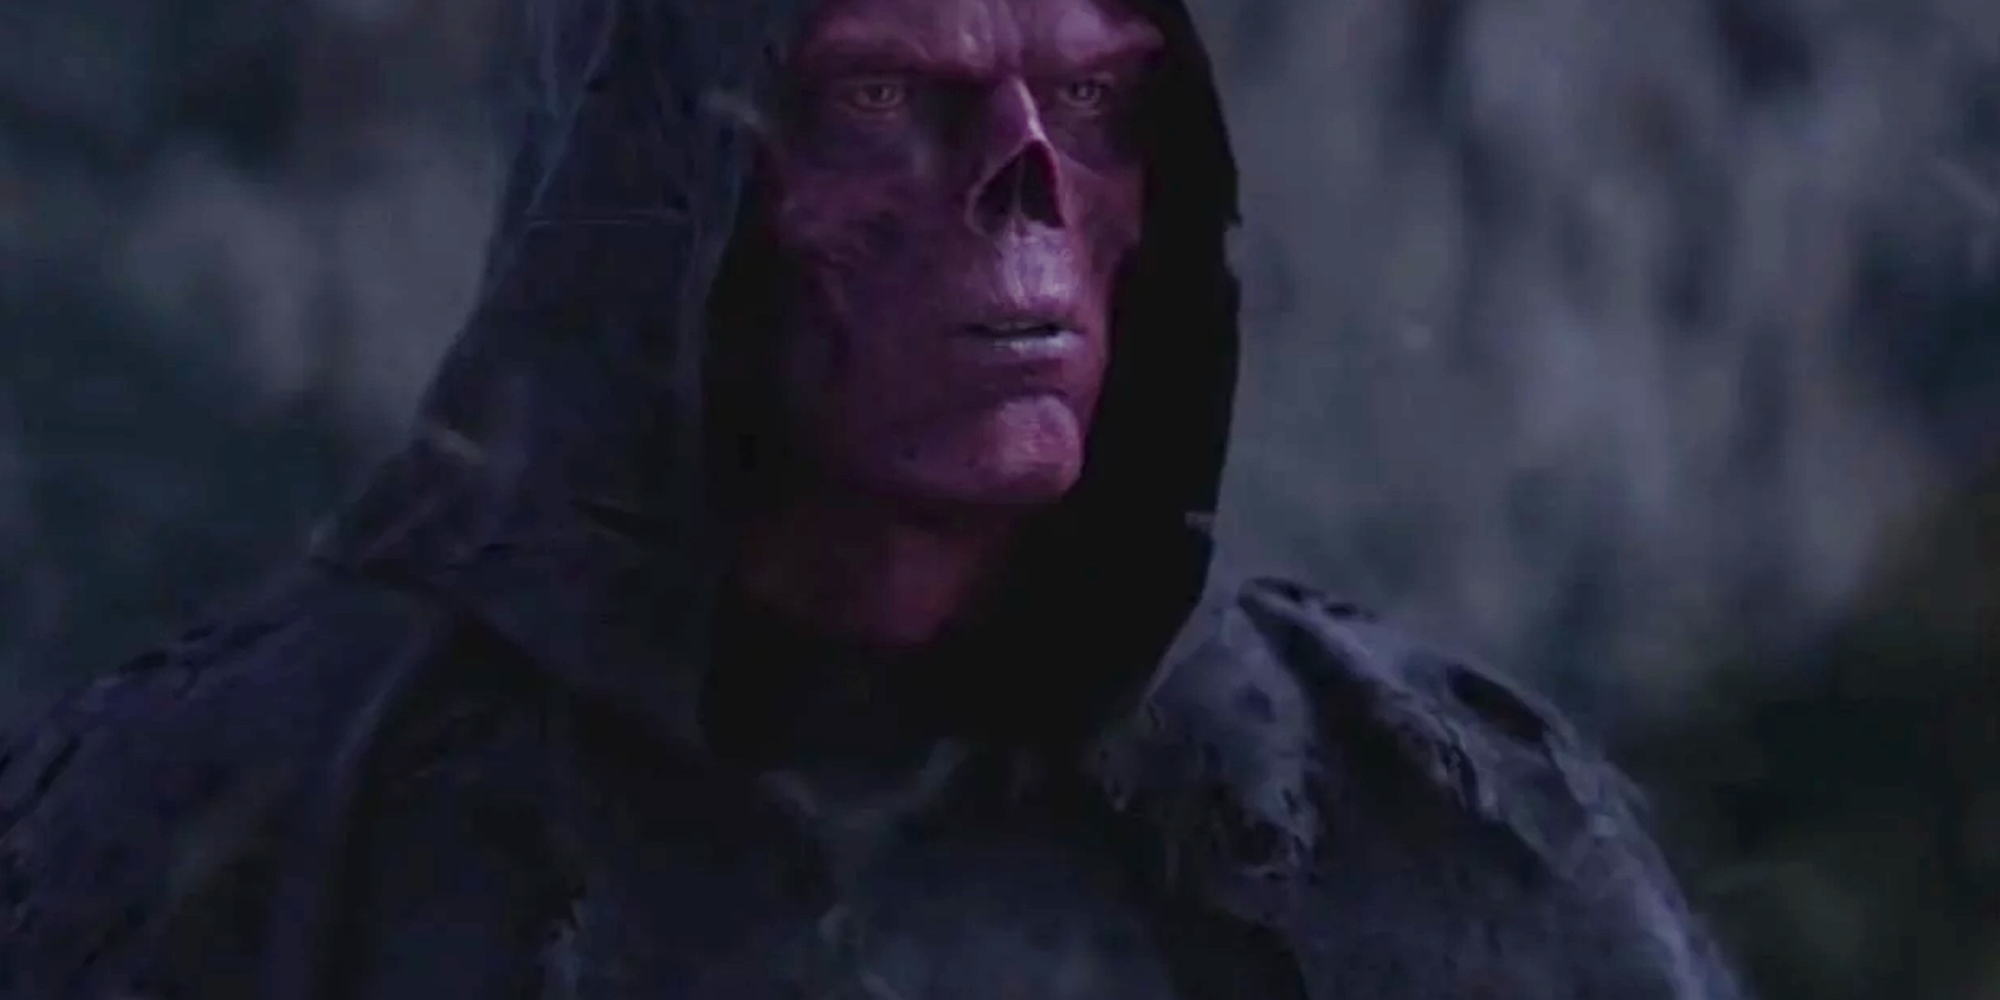 The face of Red Skull looks out from underneath his hood